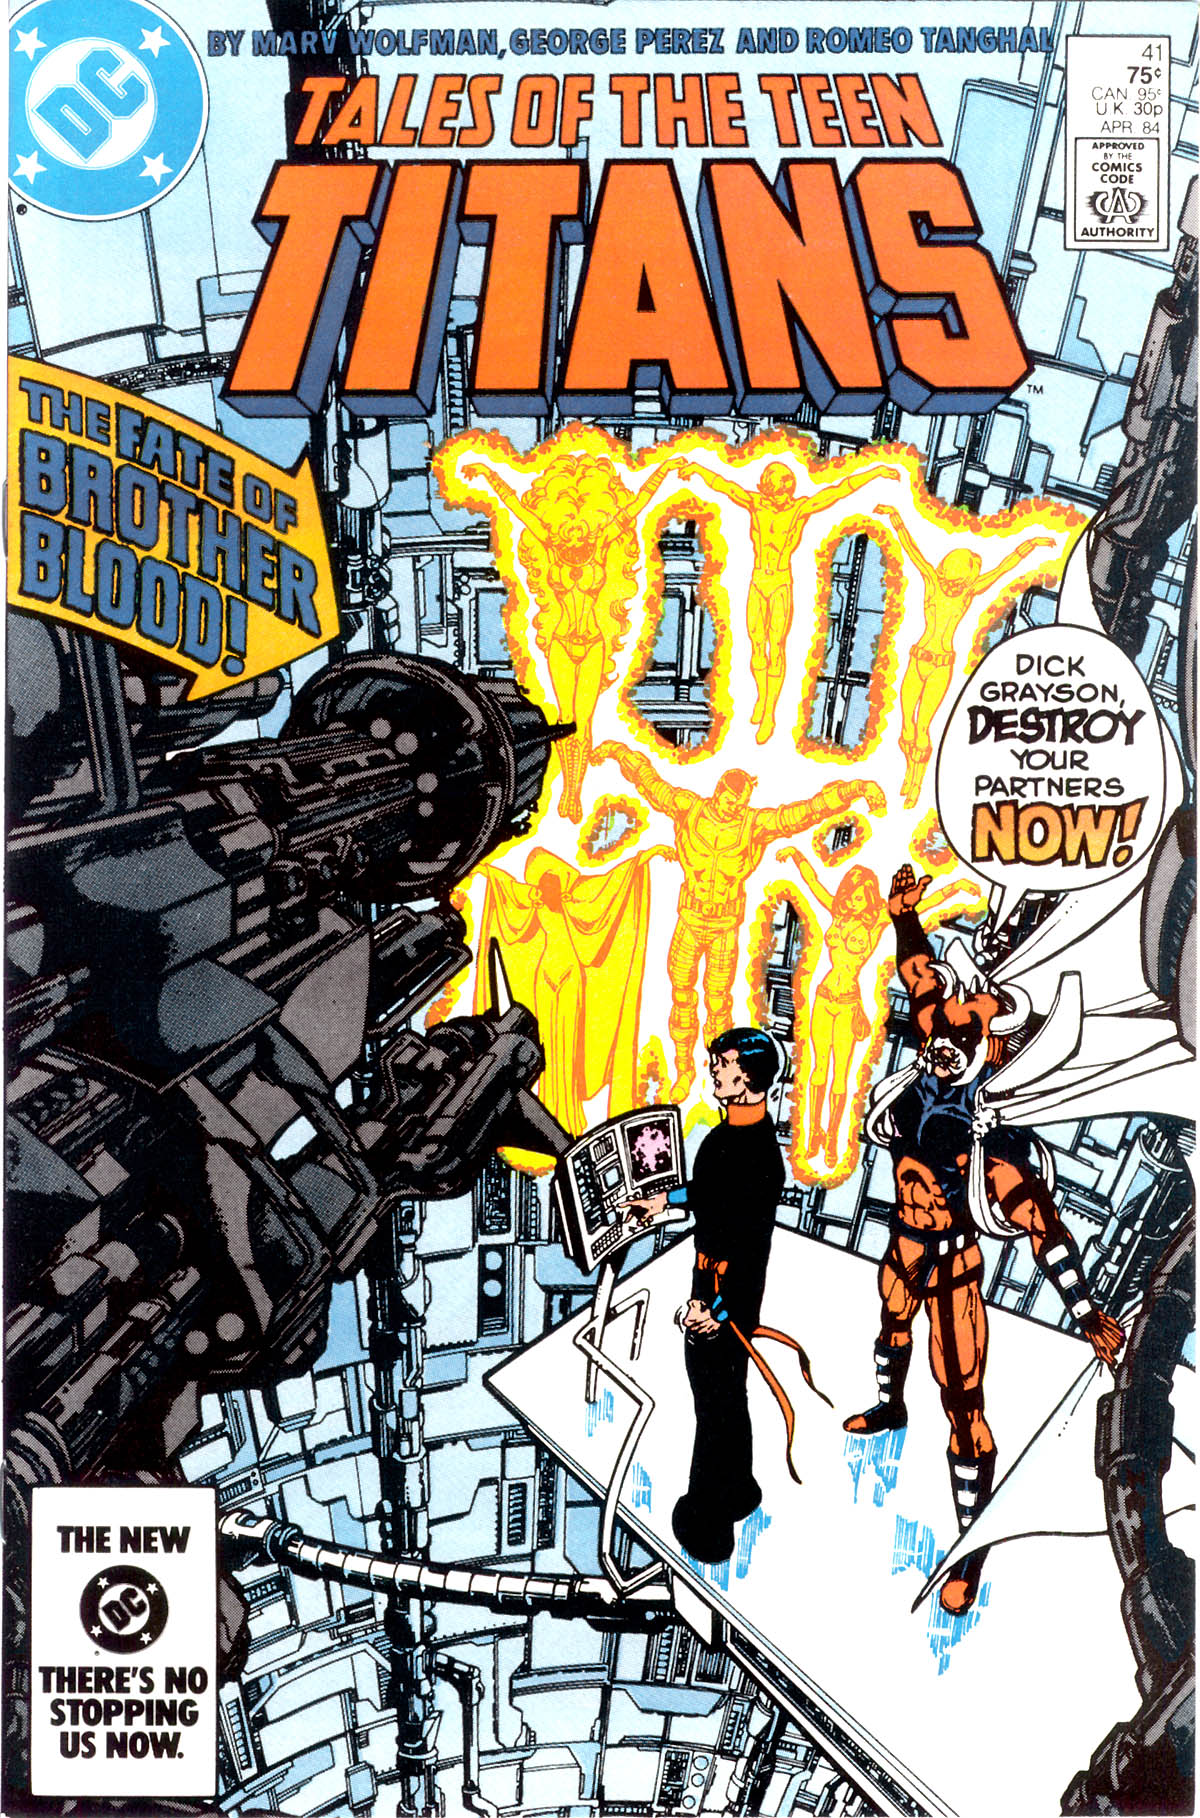 Tales of the Teen Titans Issue #41 #2 - English 1